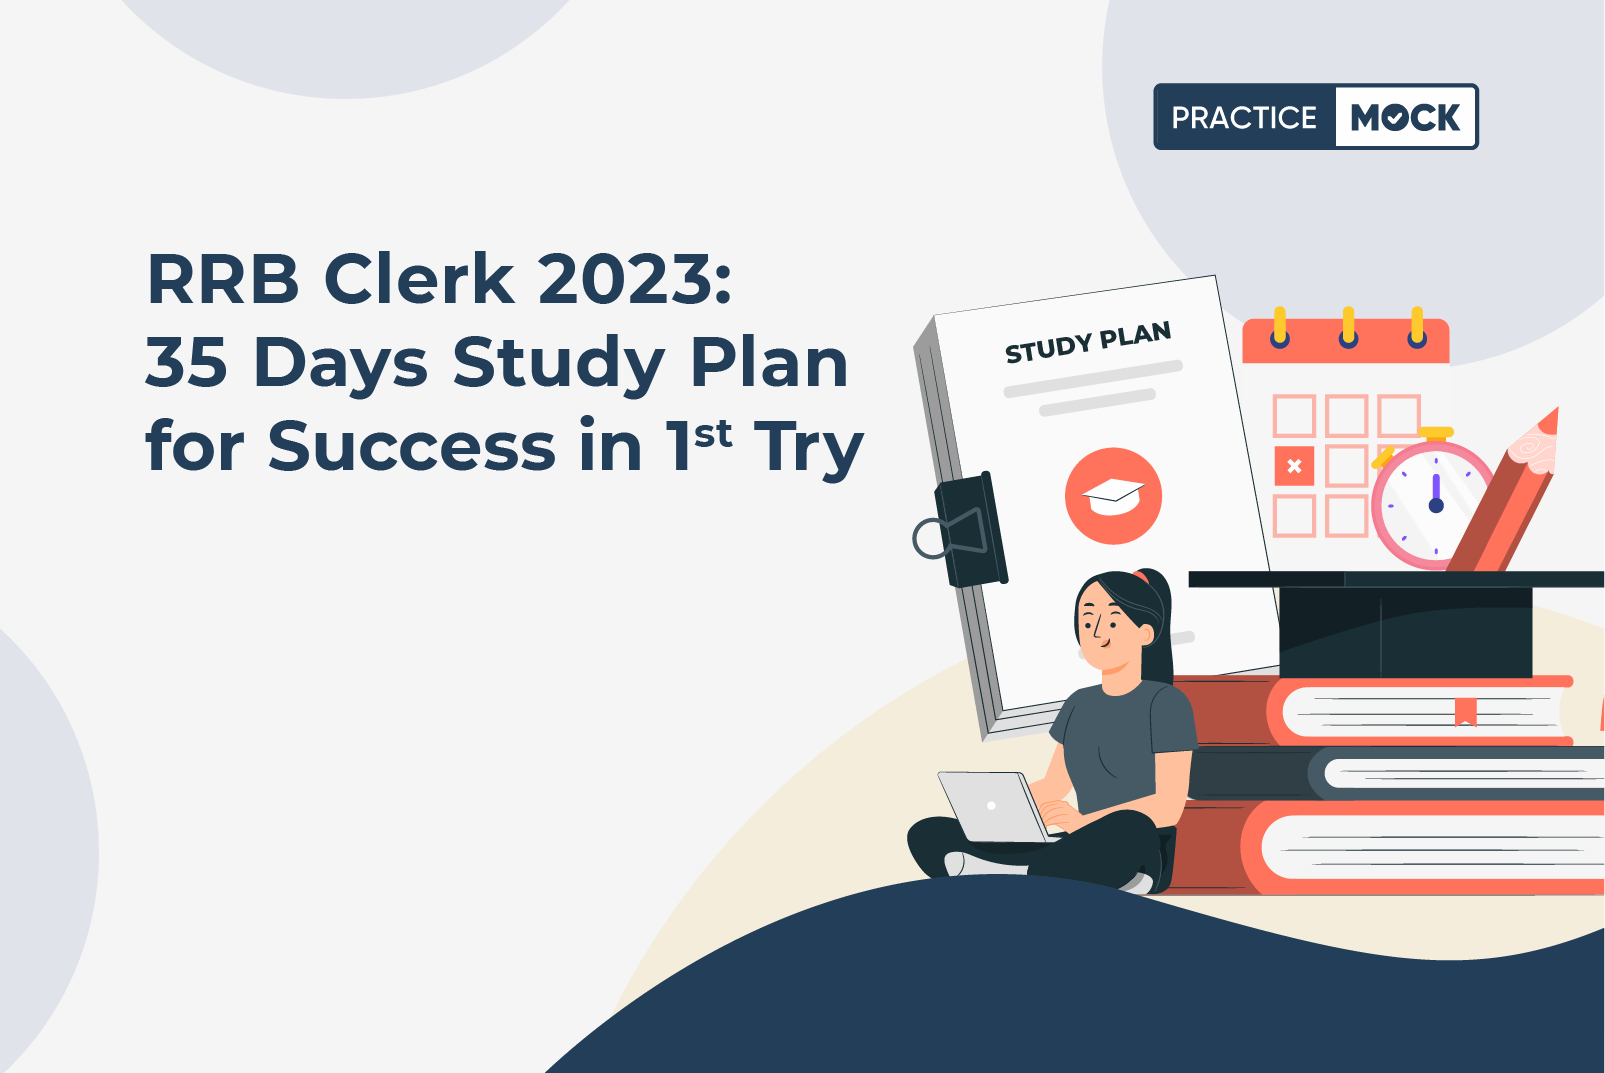 RRB Clerk 2023 35 Days Study Plan for Success in 1st Try